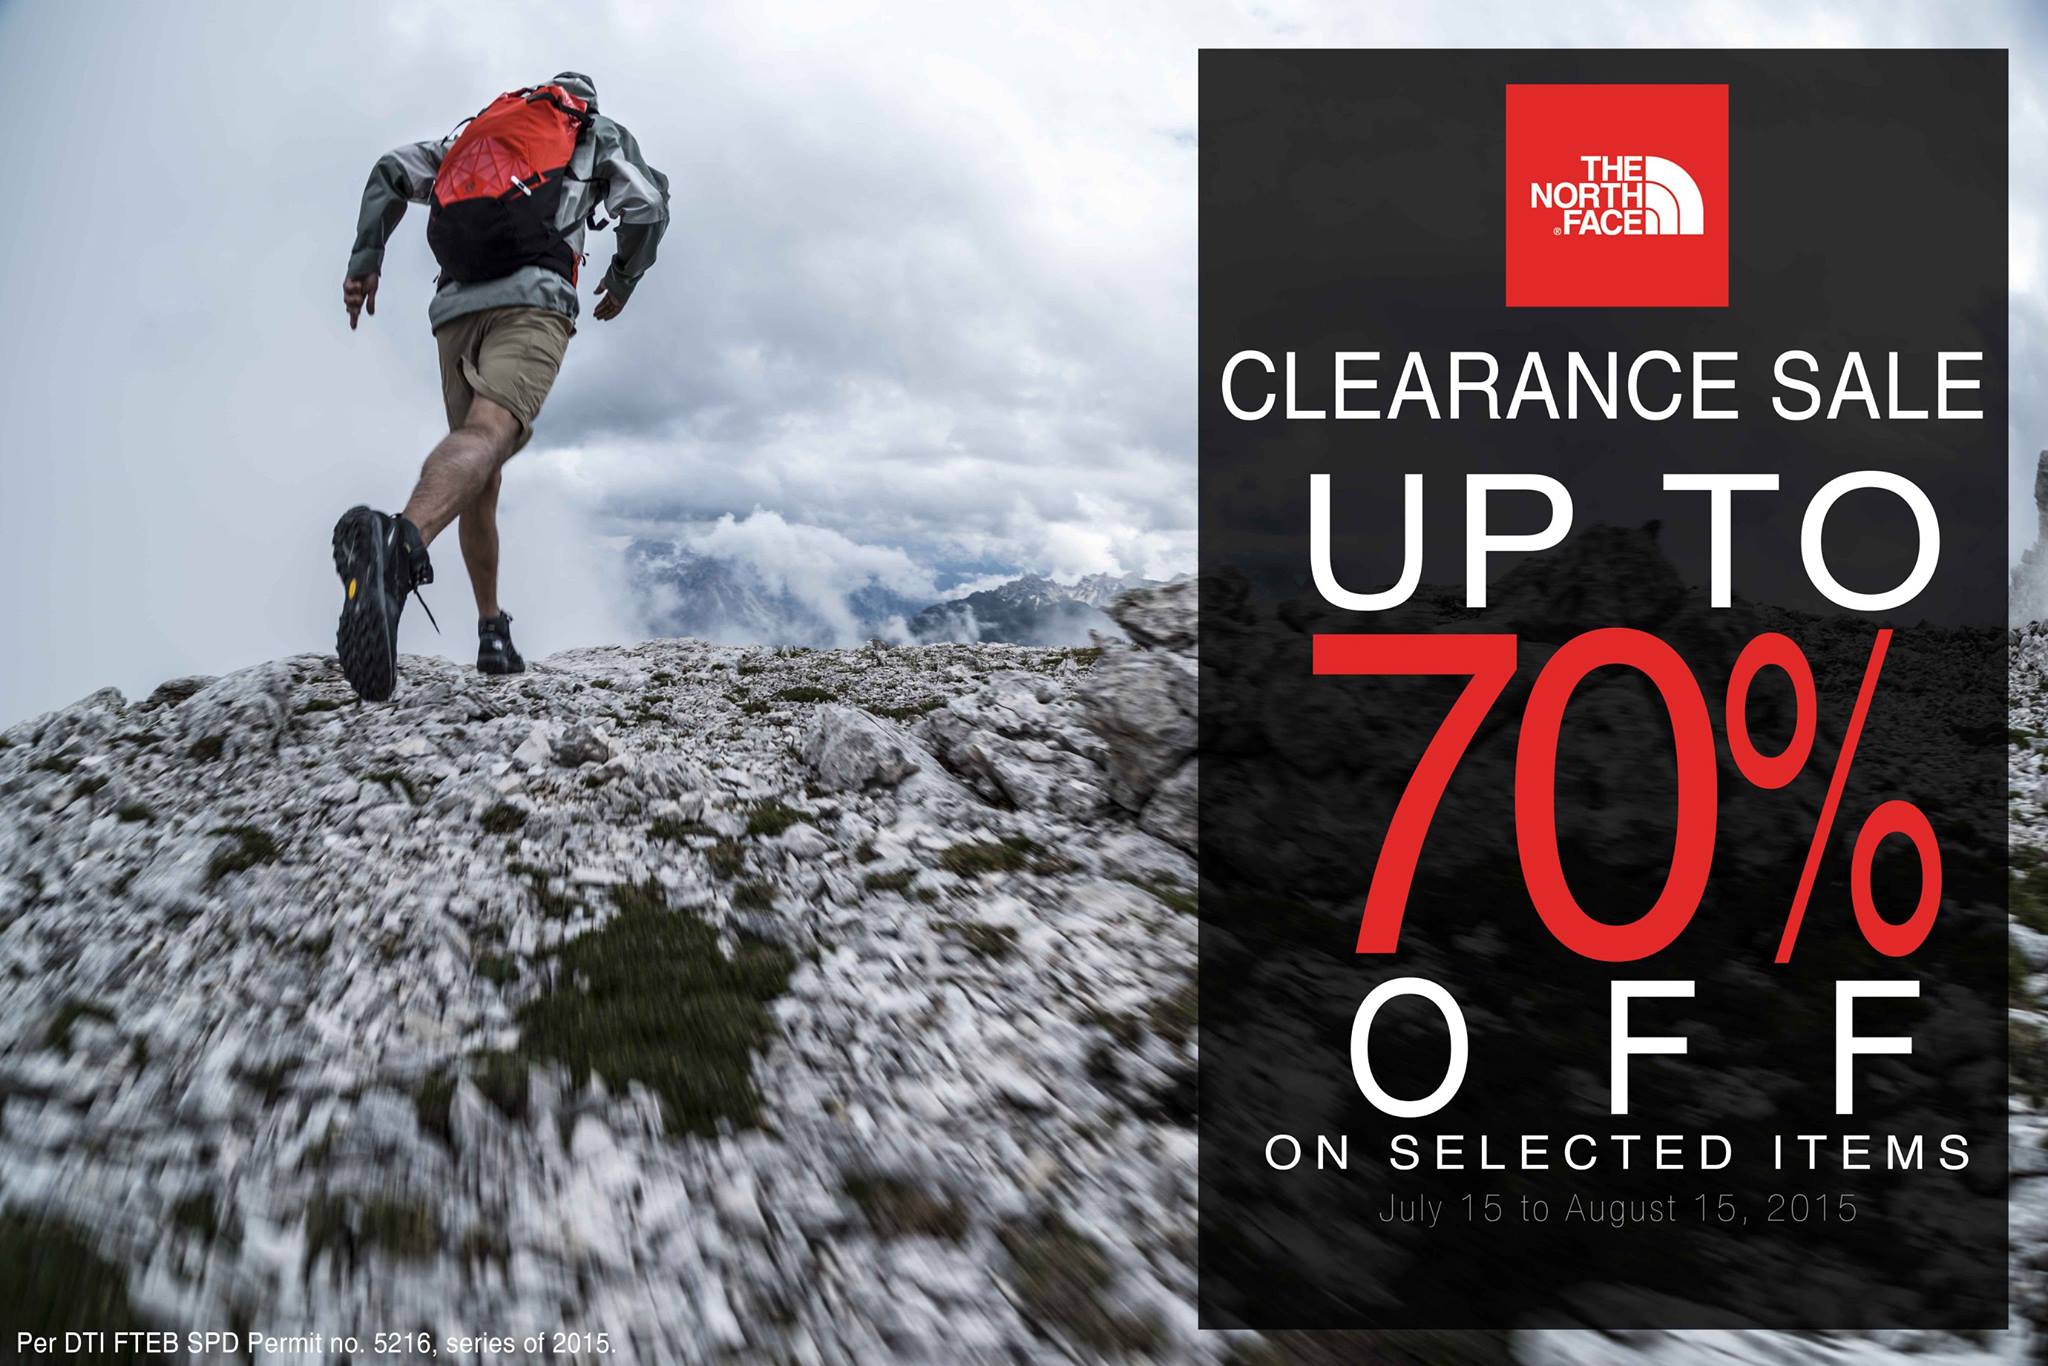 The North Face Clearance Sale July 